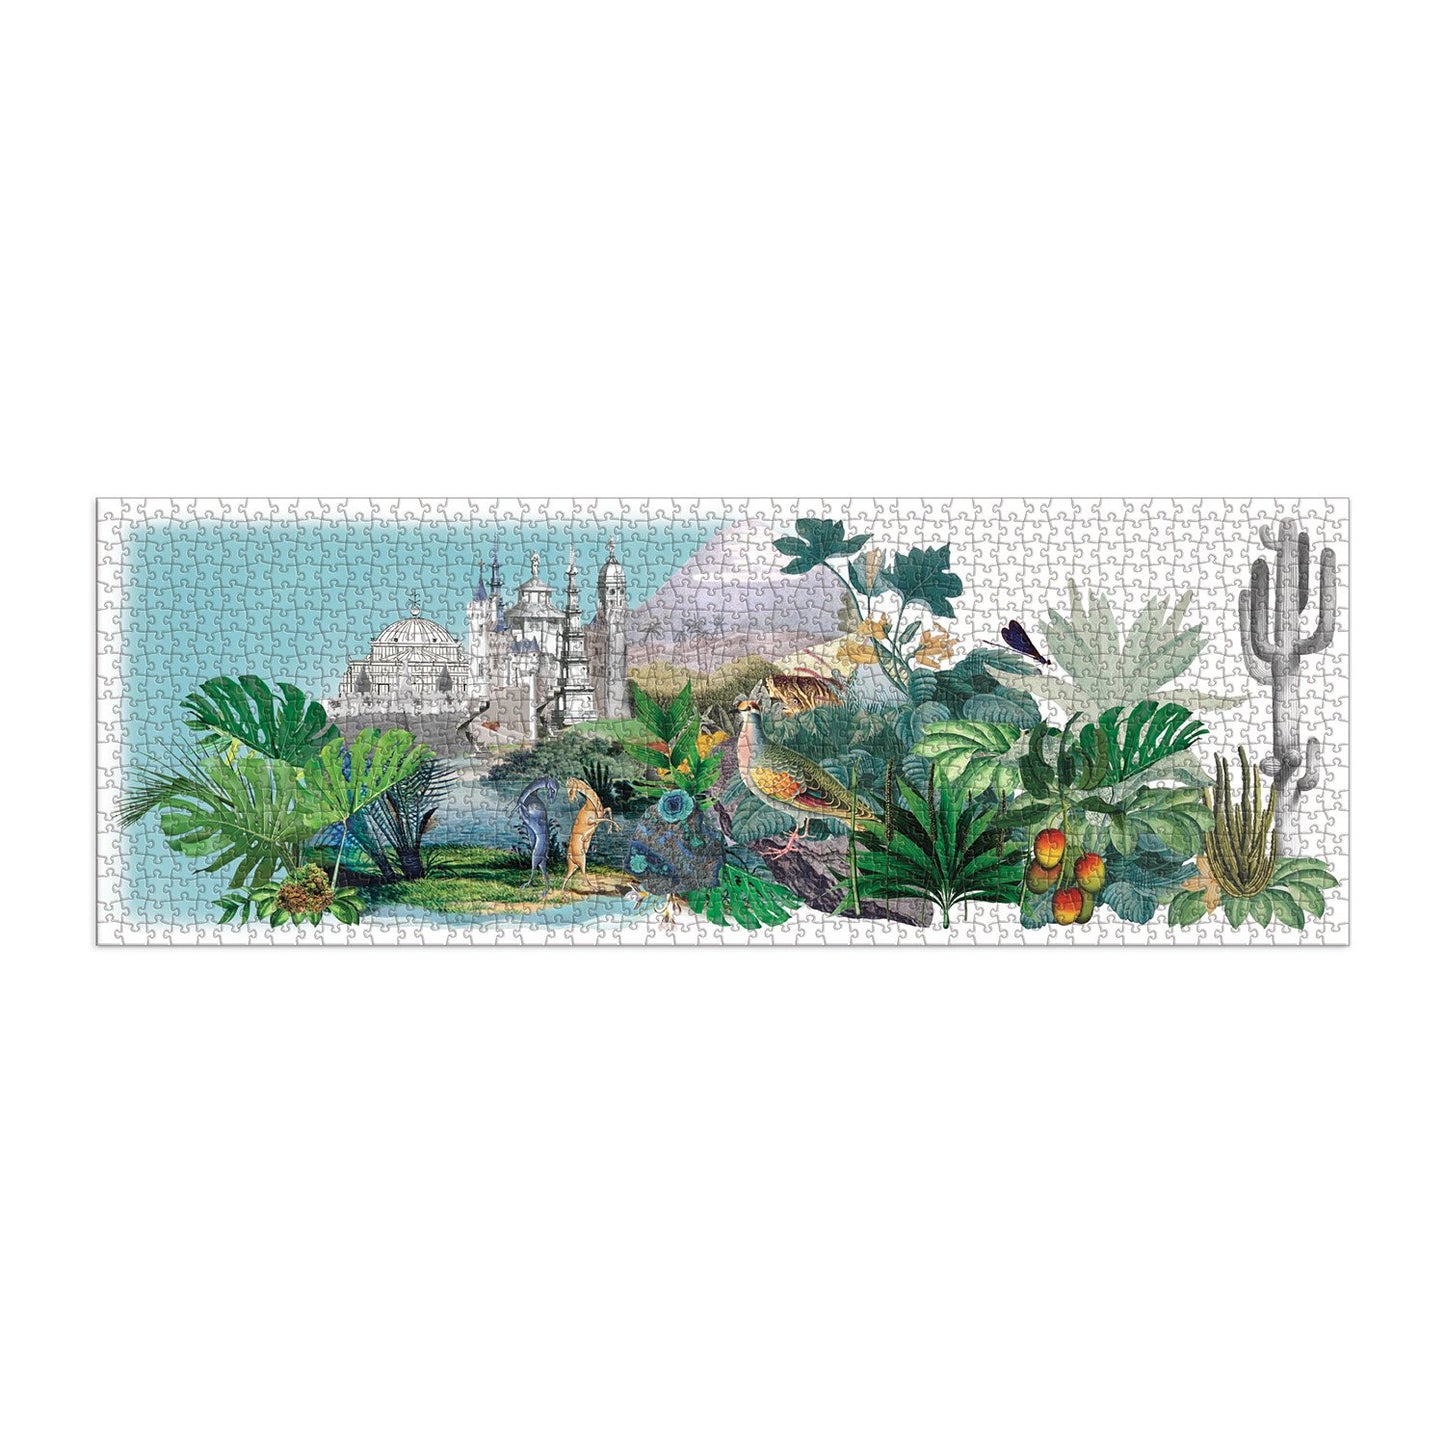 Christian Lacroix Heritage Collection - "Rêveries" A 1000 Piece Double Sided Panoramic Puzzle